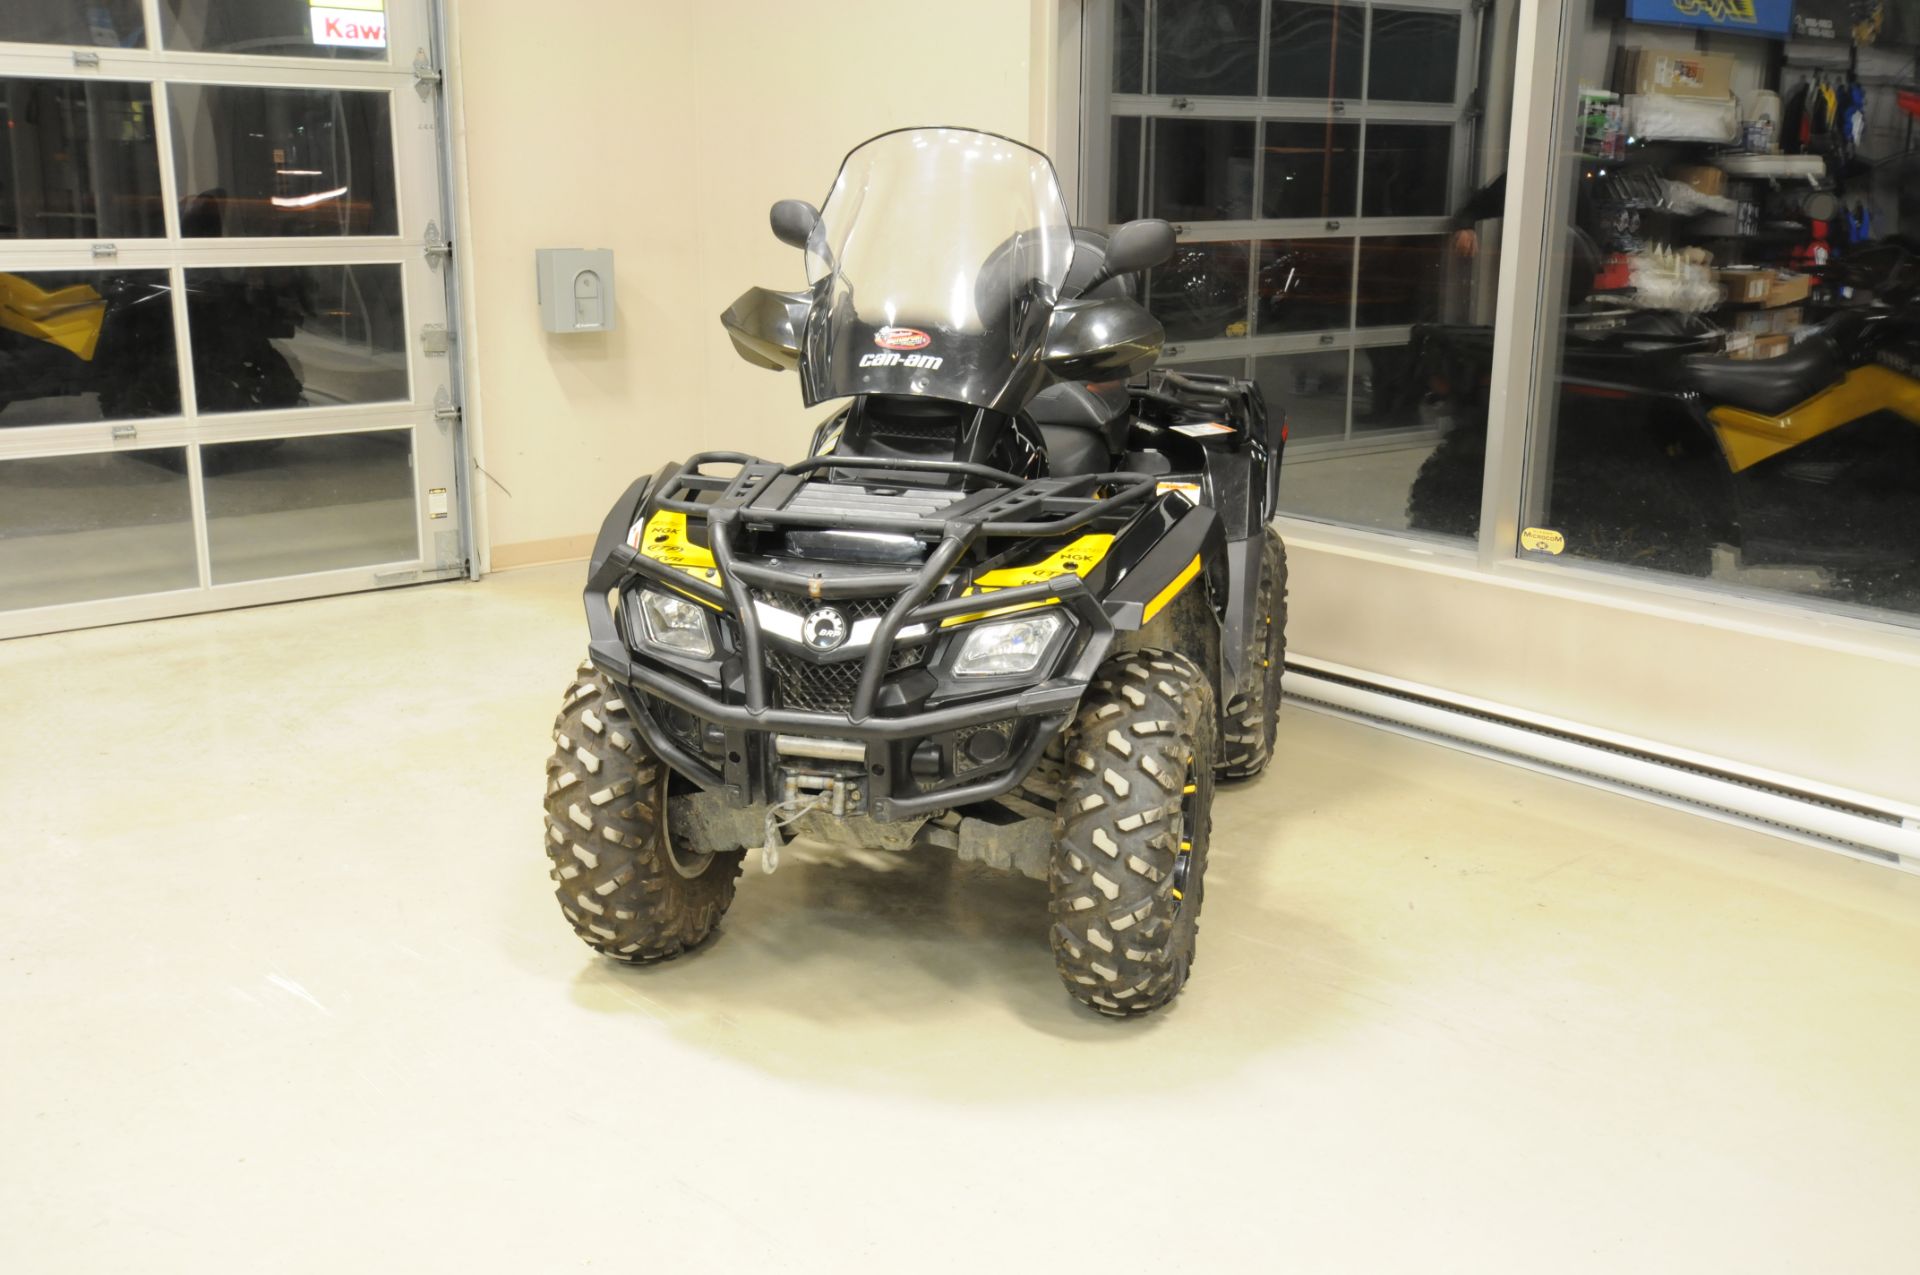 BRP CAN AM (2011) MAX800 ATV AVEC MOTEUR ROTAX 800R V-TWIN 4-TEMPS, 4X4, WARN TREUIL A CABLE AVANT - Image 2 of 6